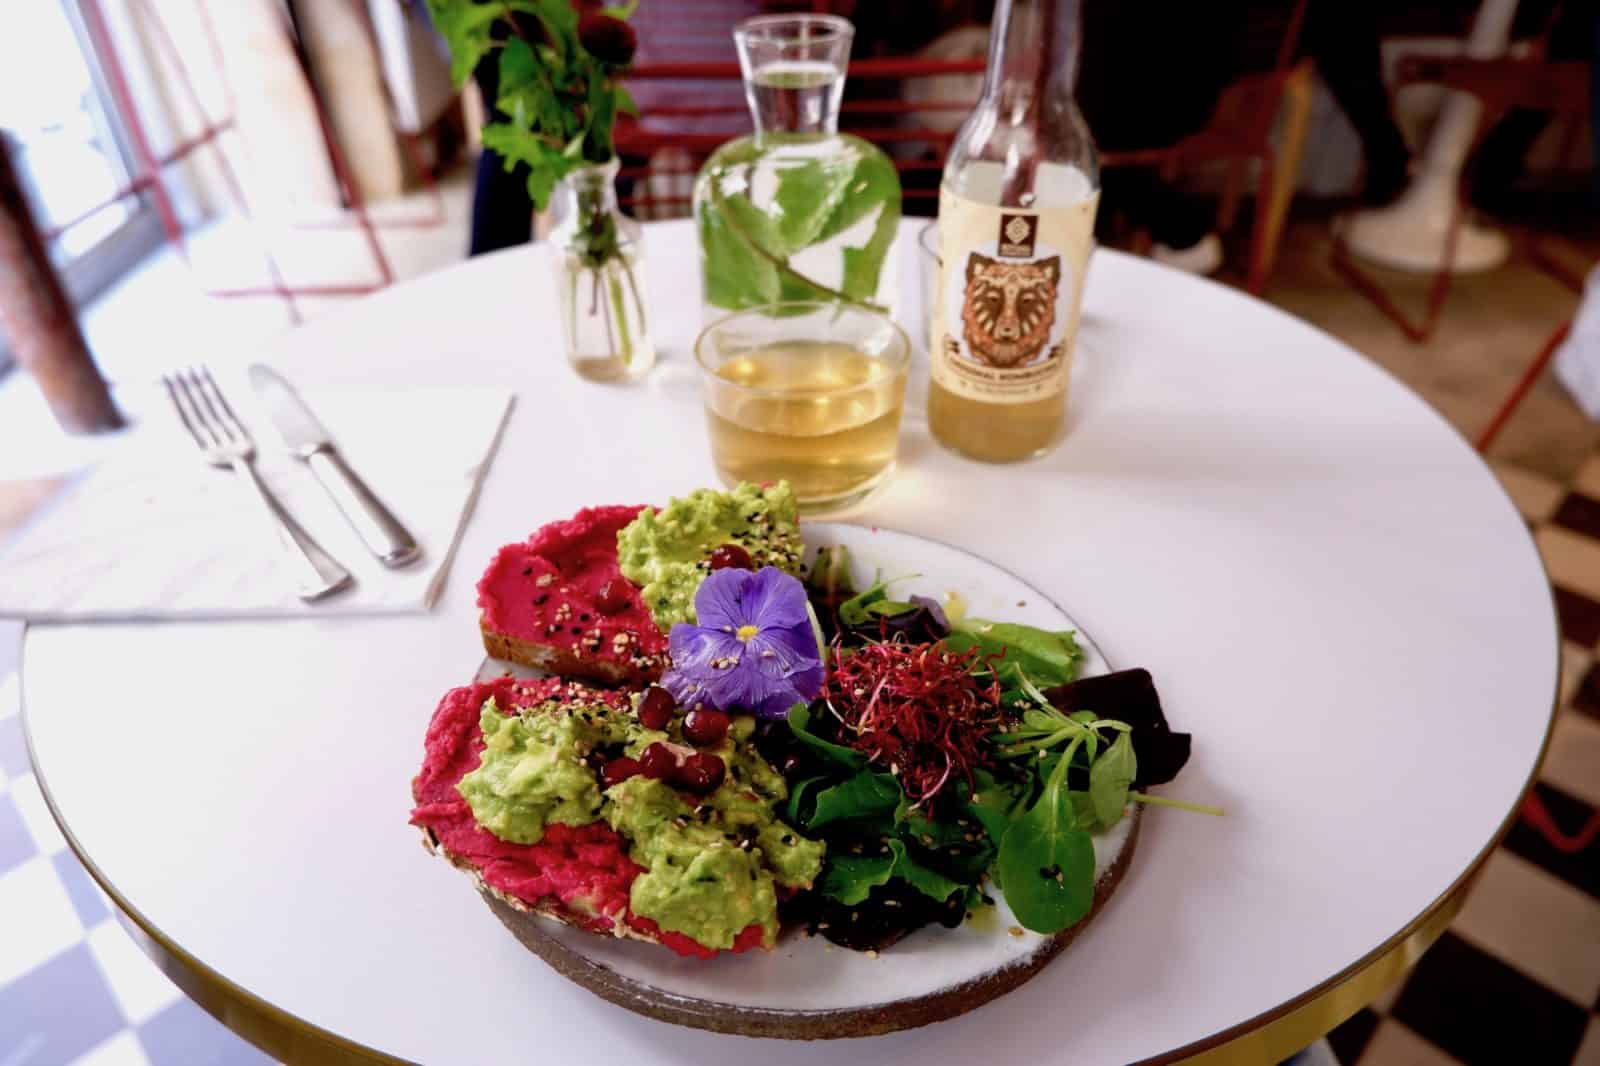 A superb plate of avocado toast and salad at Berry, one of the best Australian-inspired coffee shops for brunch in Paris.